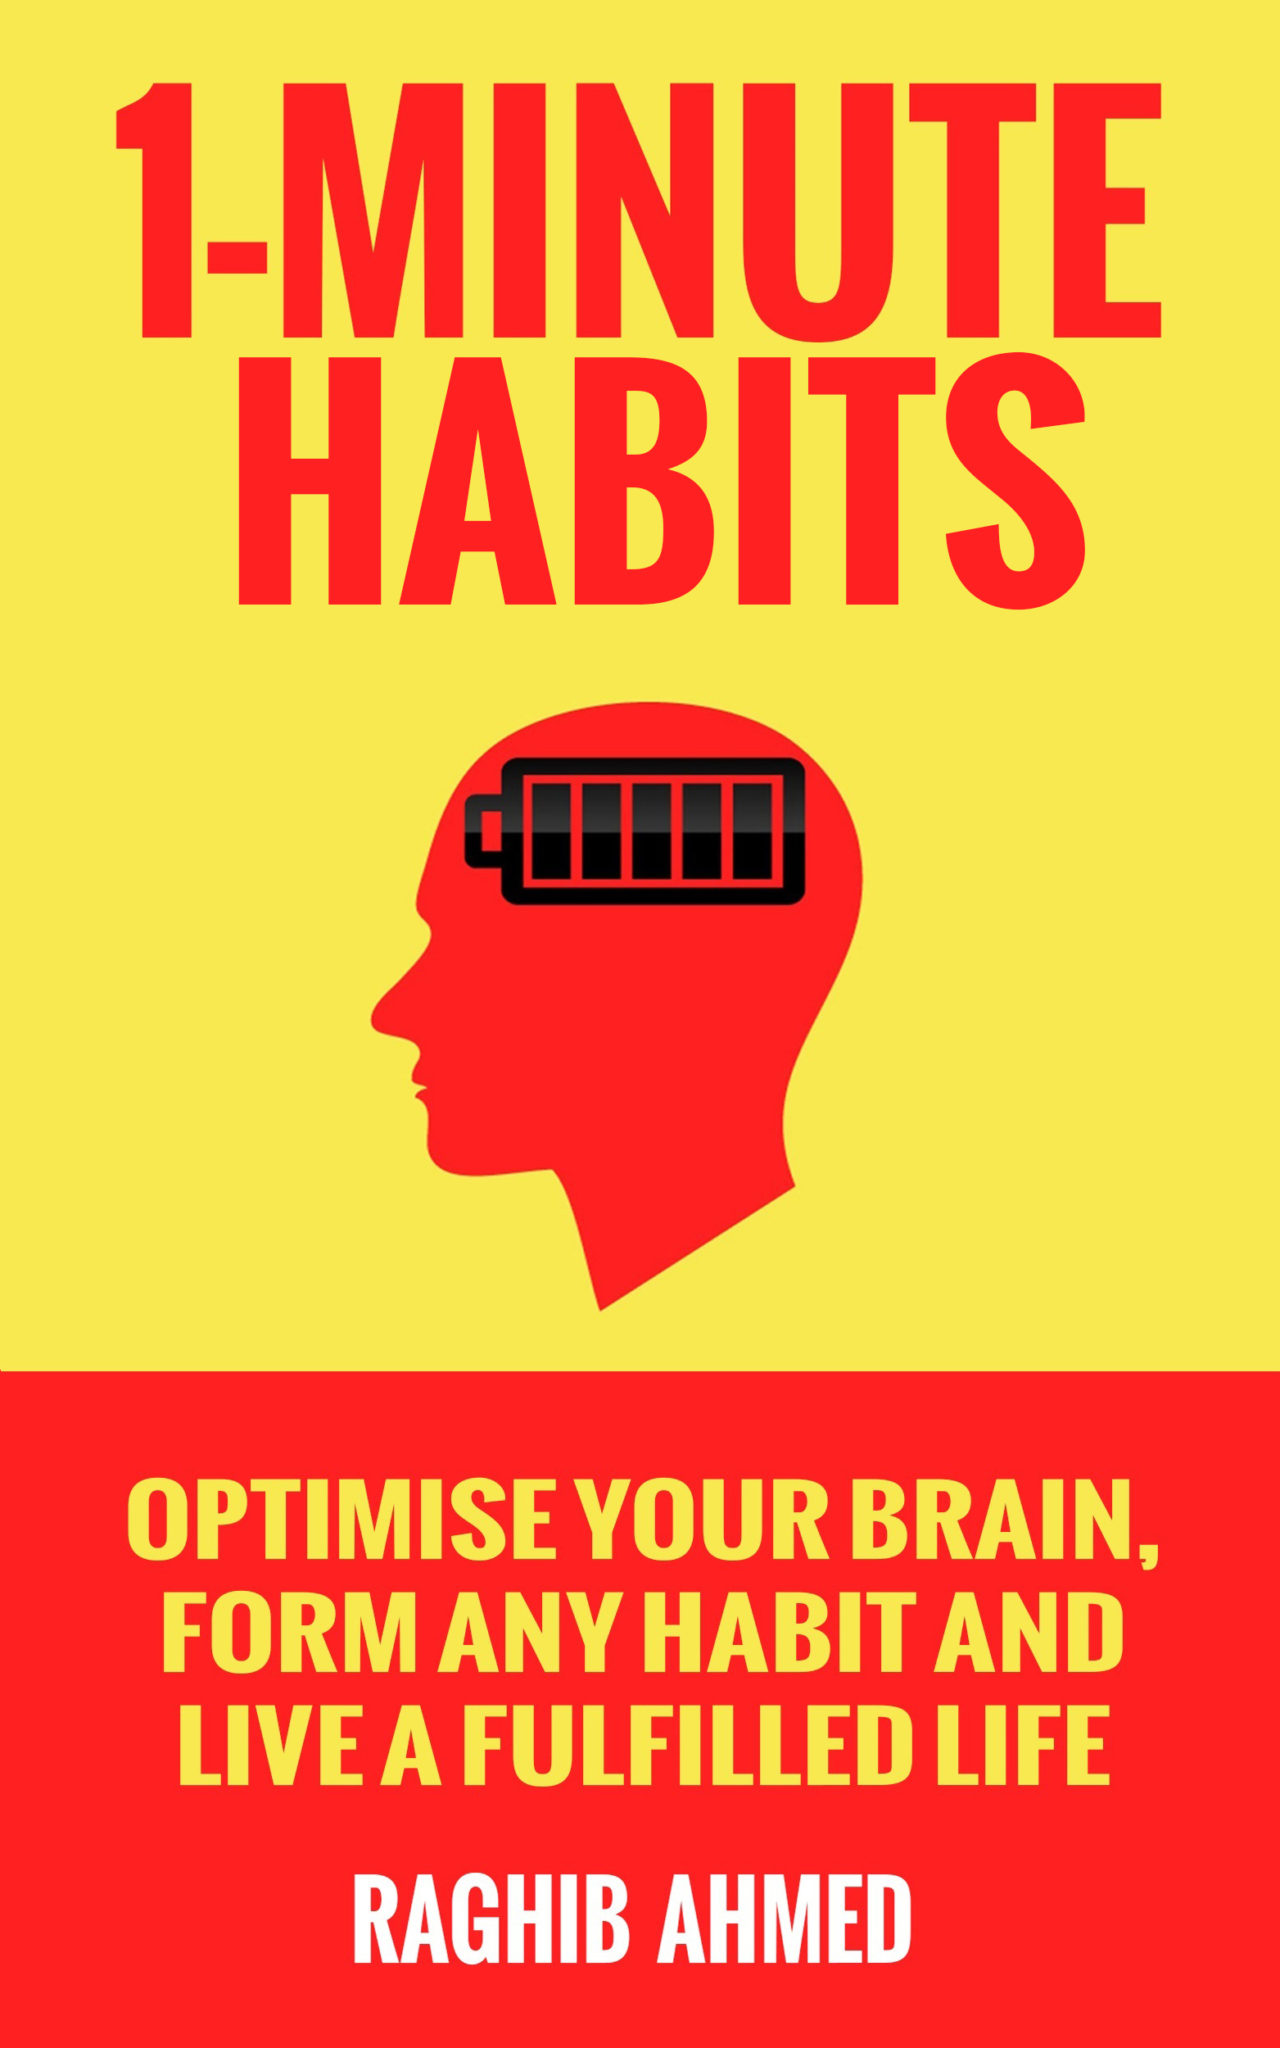 1-Minute Habits: Optimise Your Brain, Form Any Habit And Live A Fulfilled Life by Raghib Ahmed